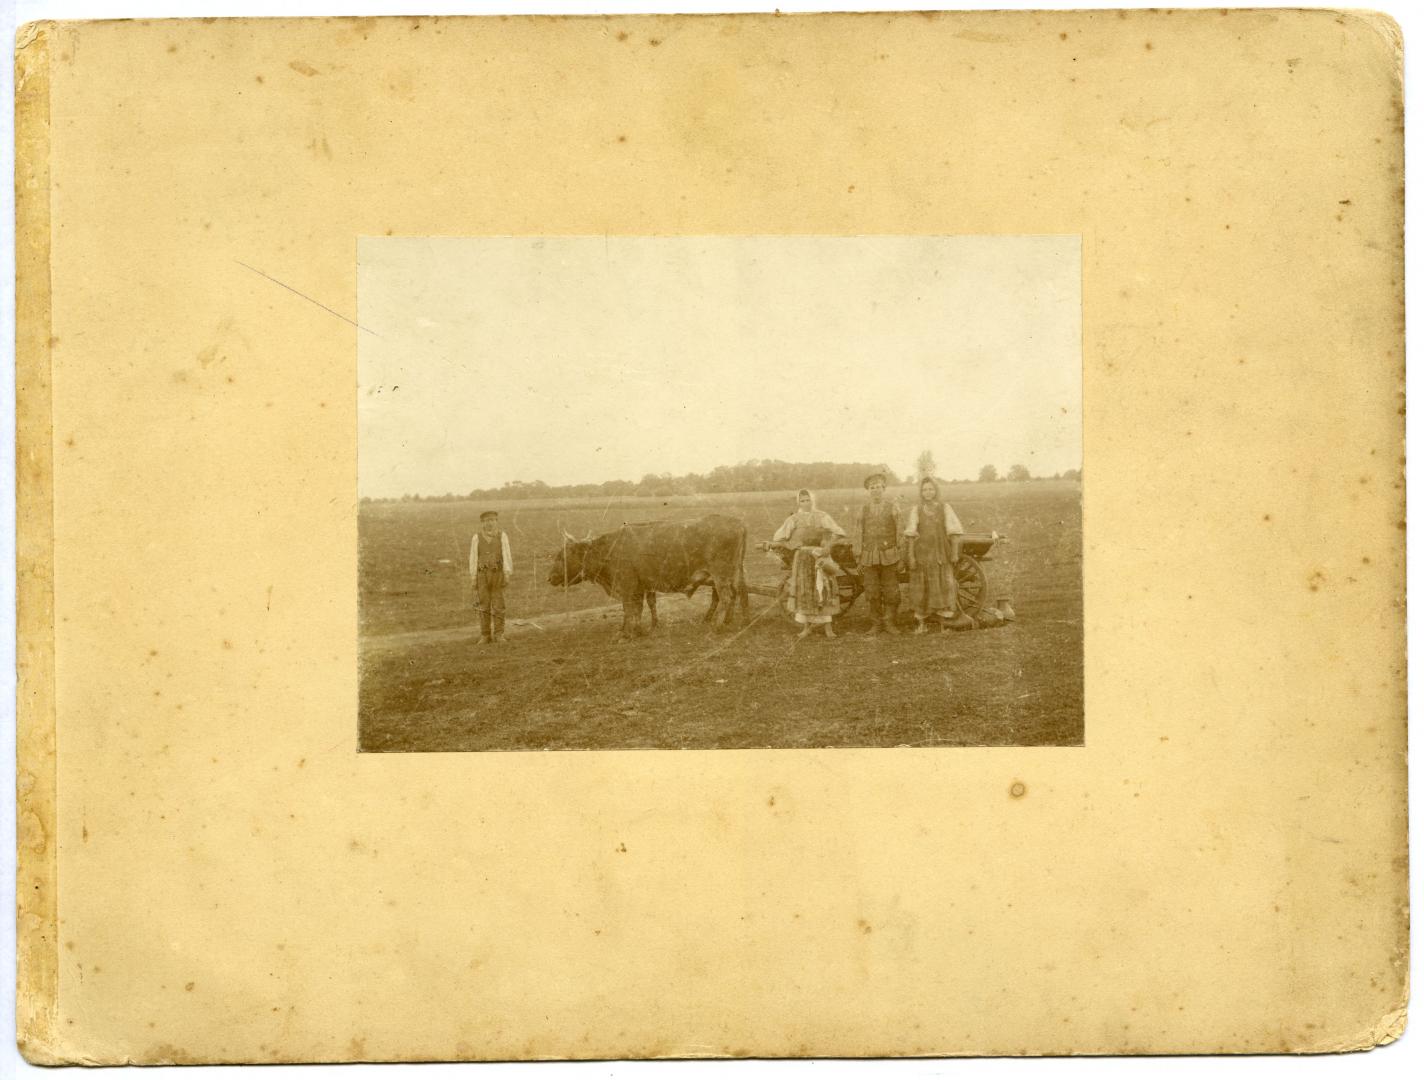 Photo. A family in a field standing near a cart with oxen